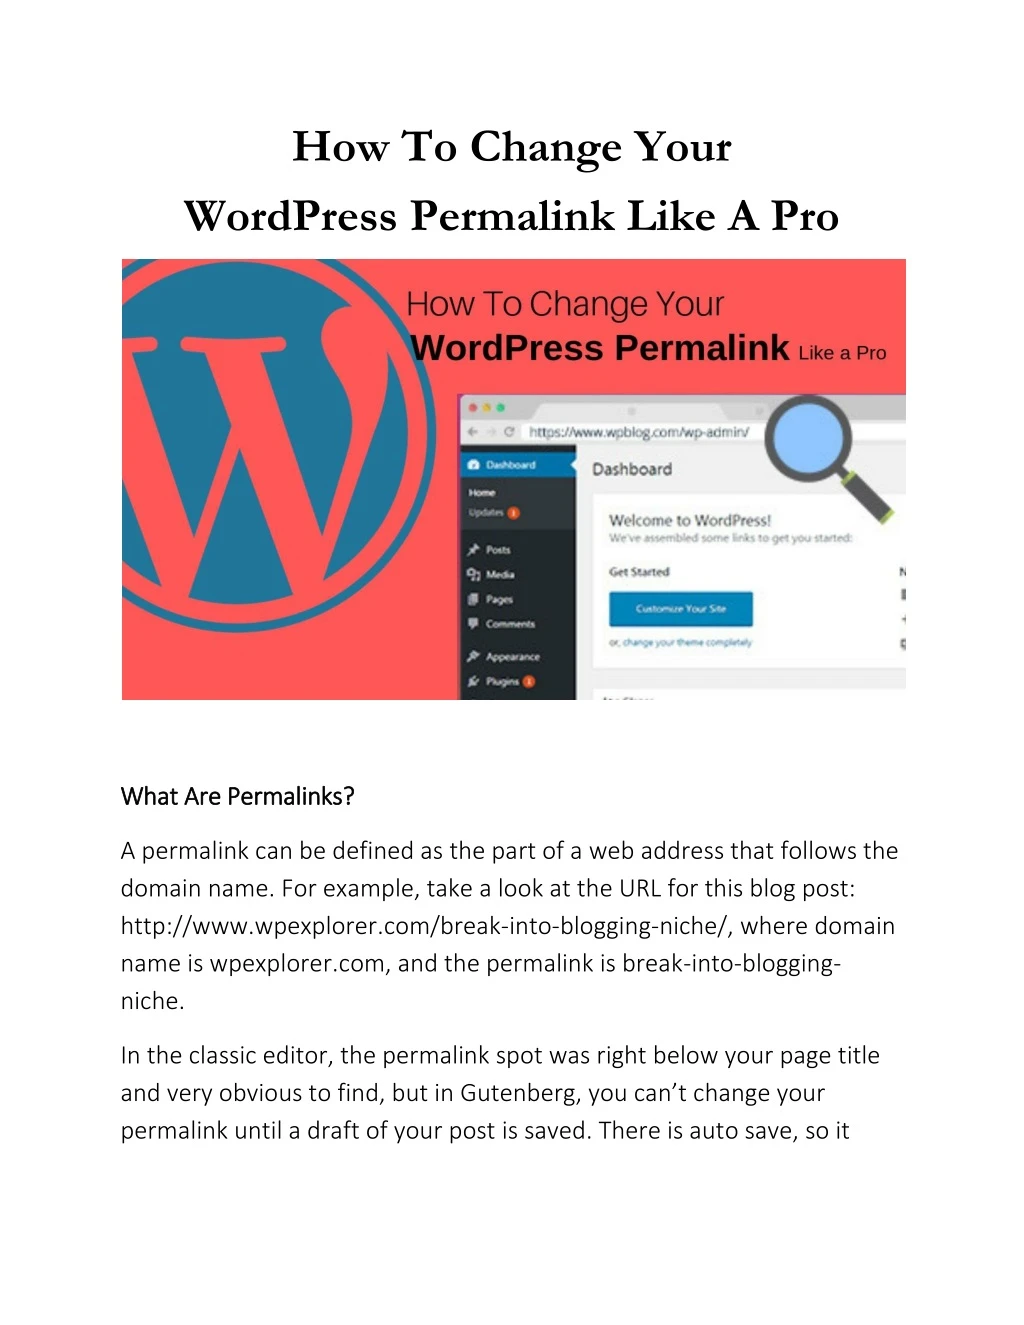 how to change your wordpress permalink like a pro